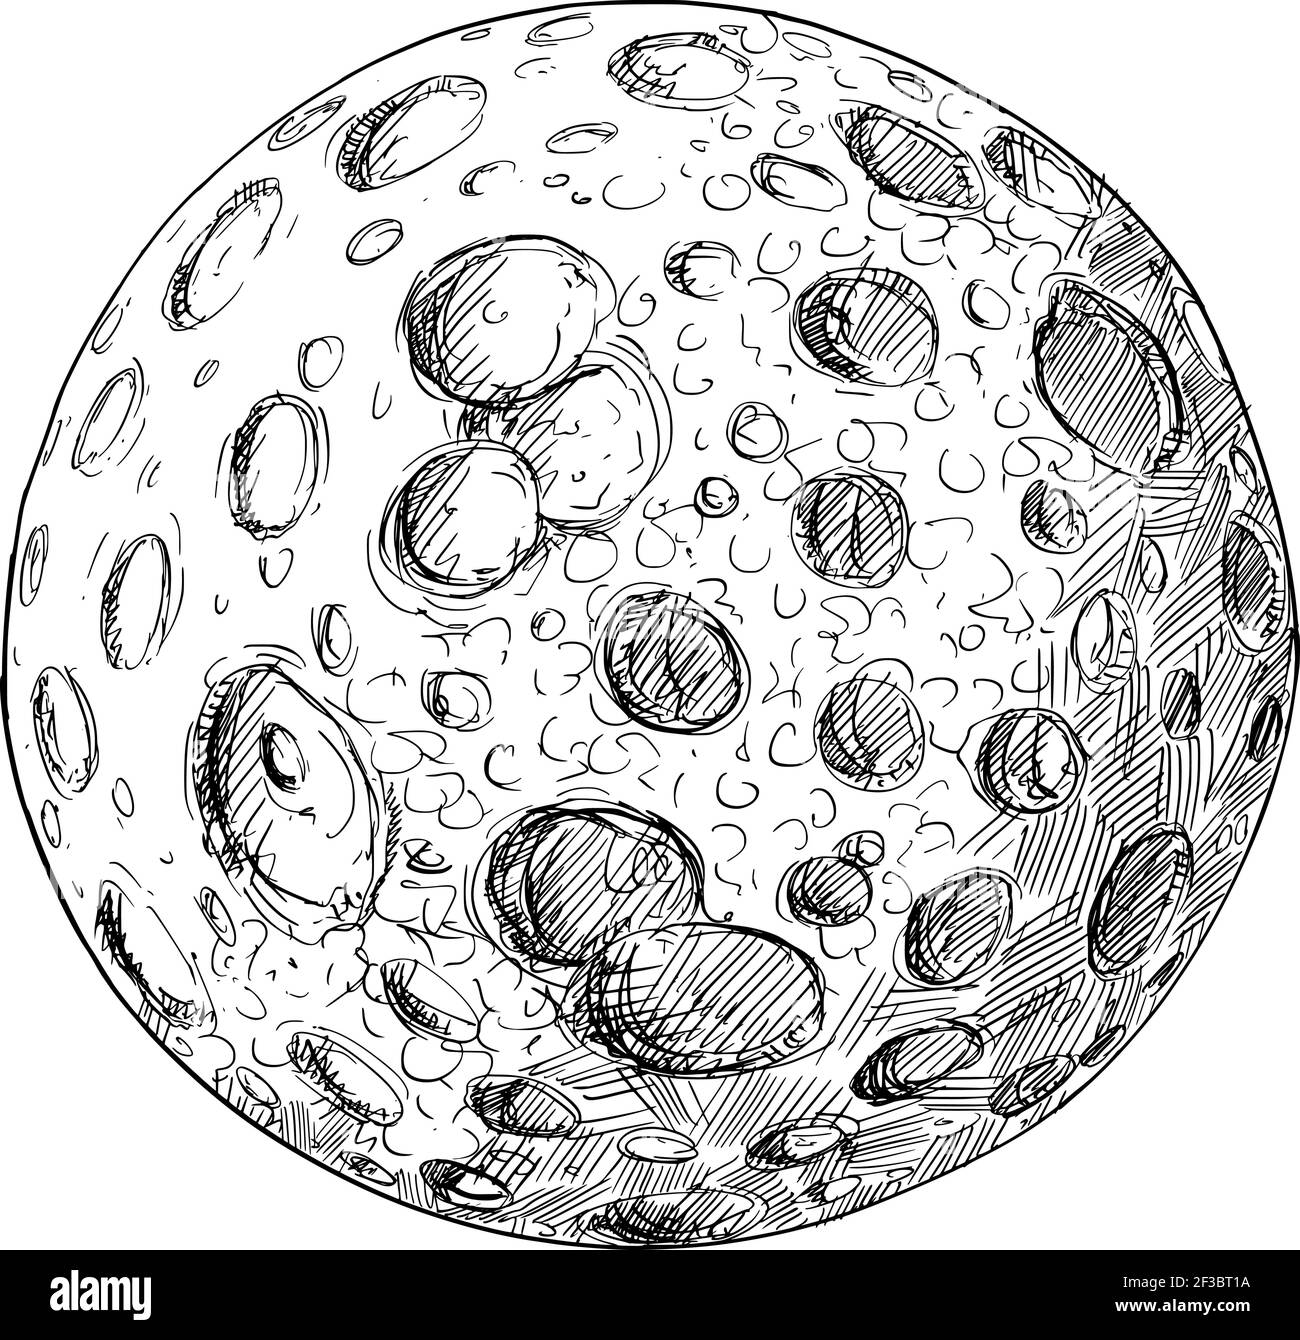 Planet or Planetary Moon Full of Impact Craters.Hand Drawing and Illustration Stock Vector